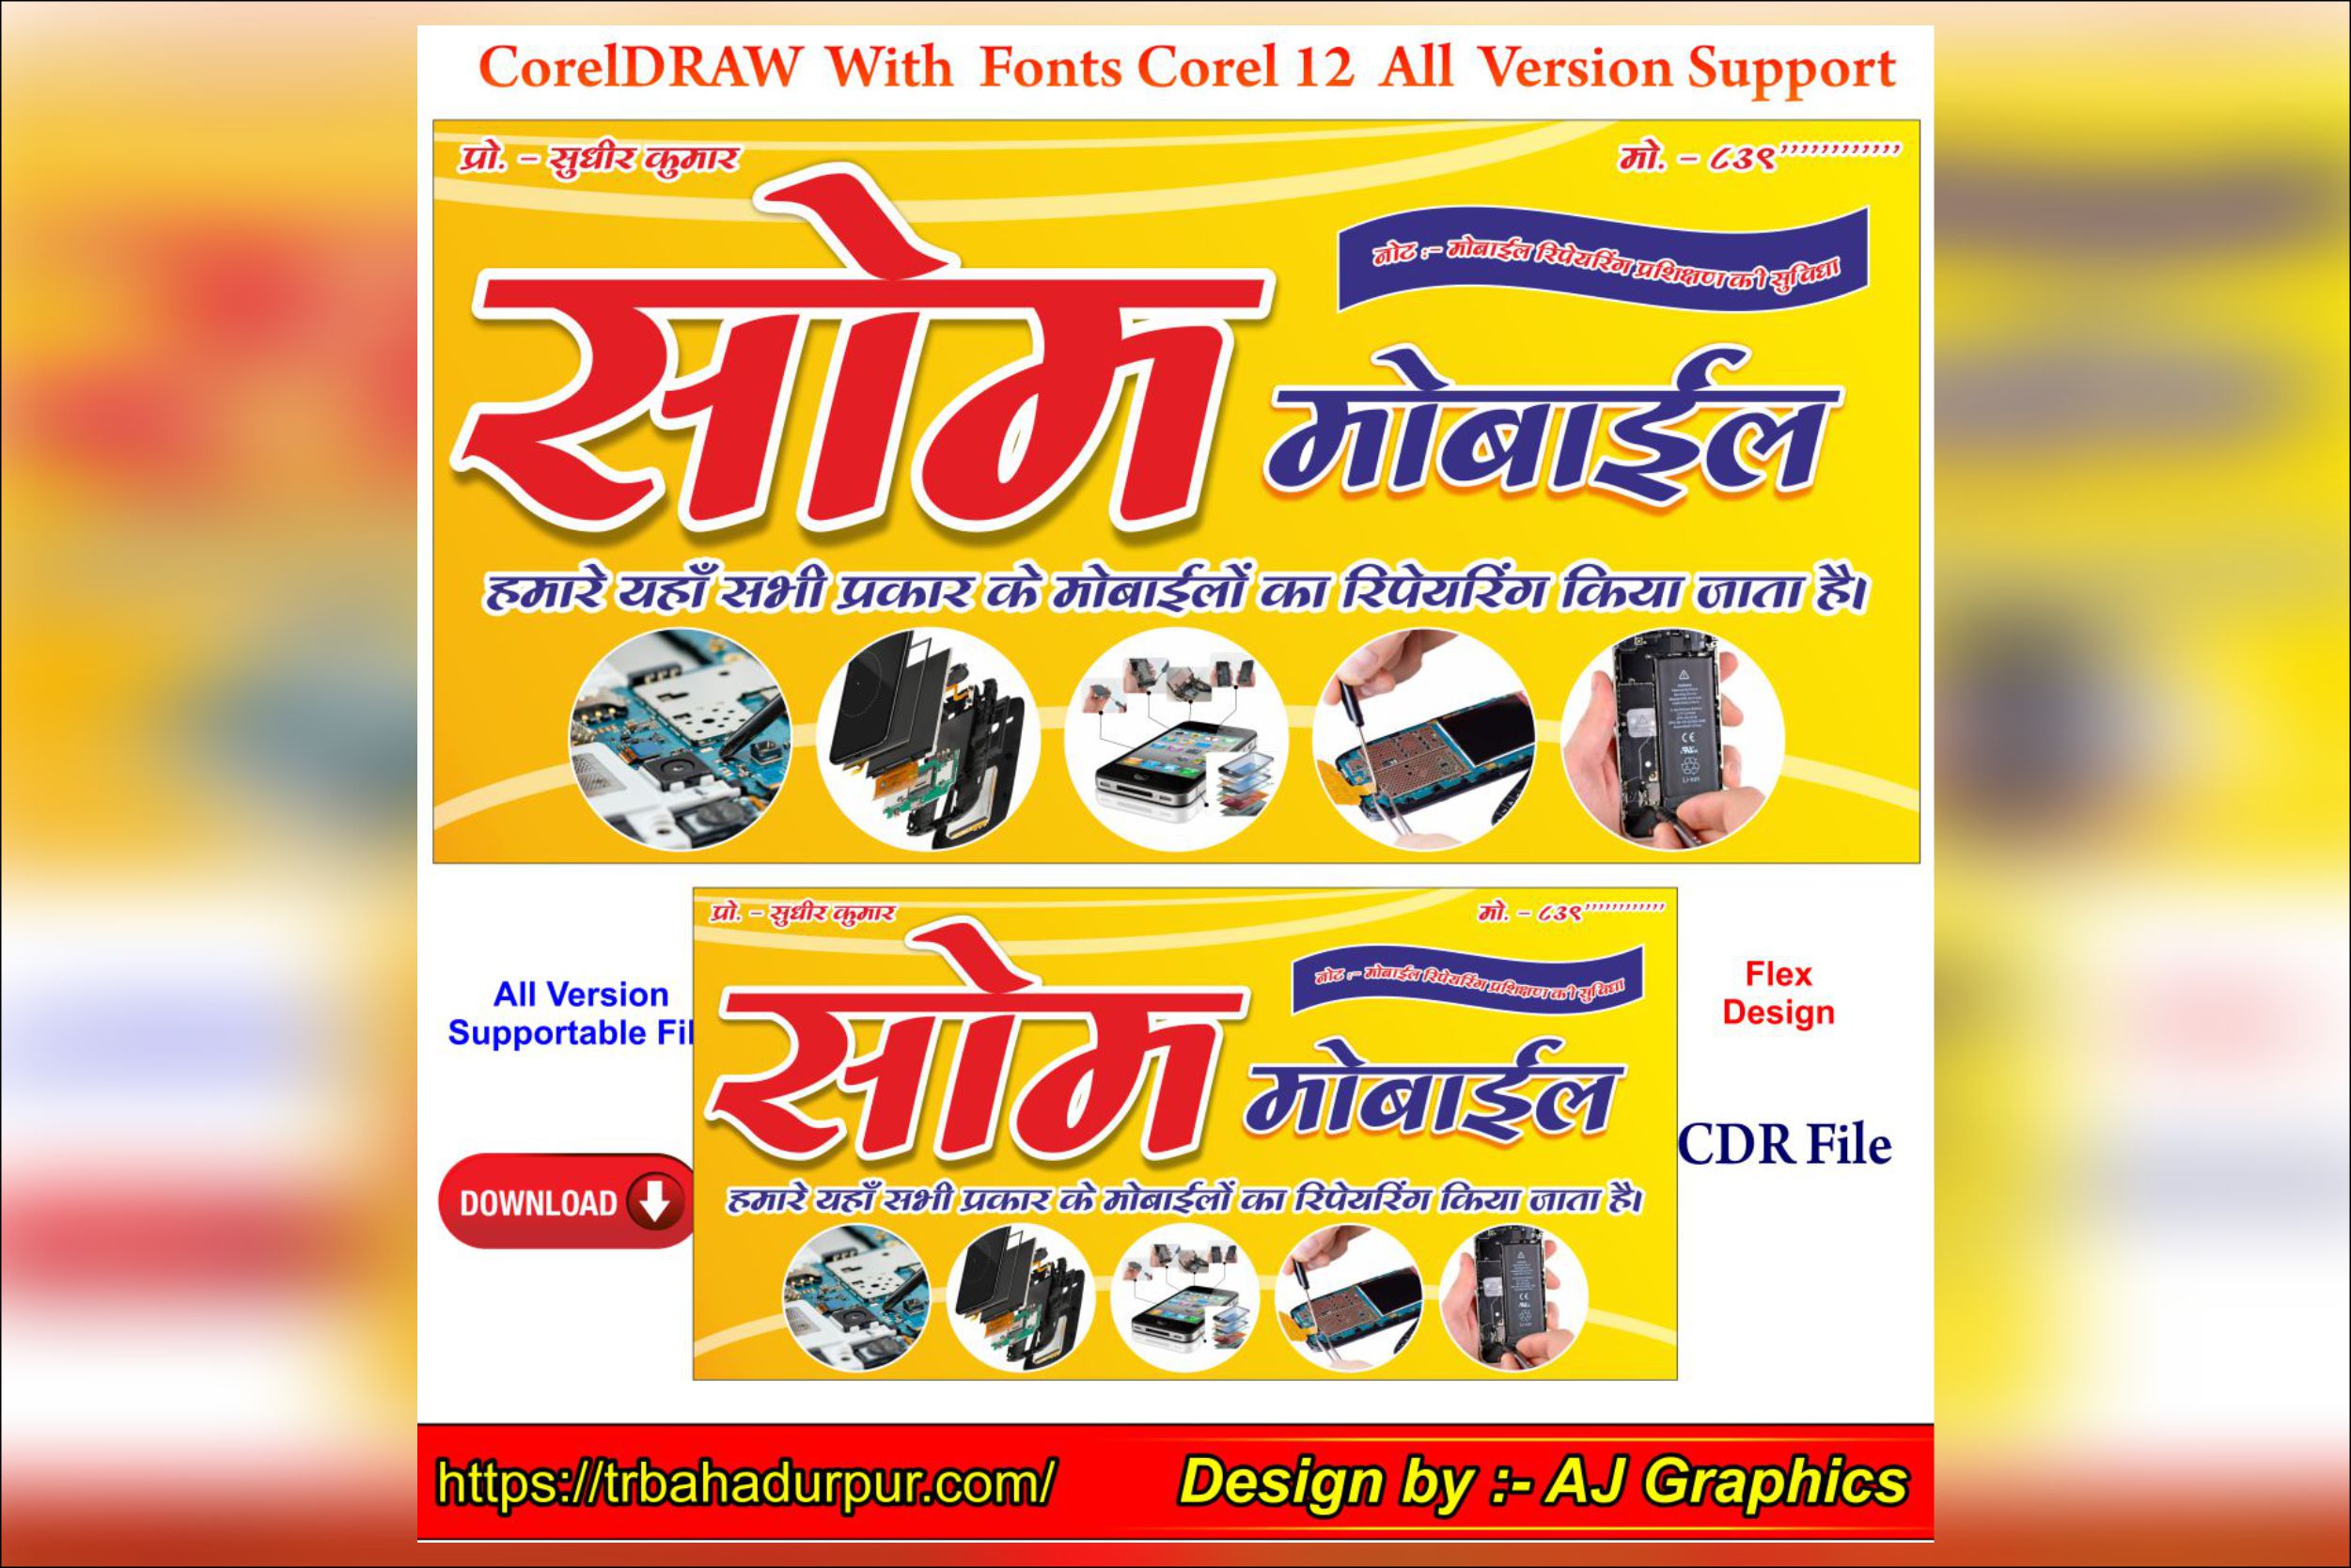 Mobile Repairing Flex CDR 12 With Fonts pinterest image.